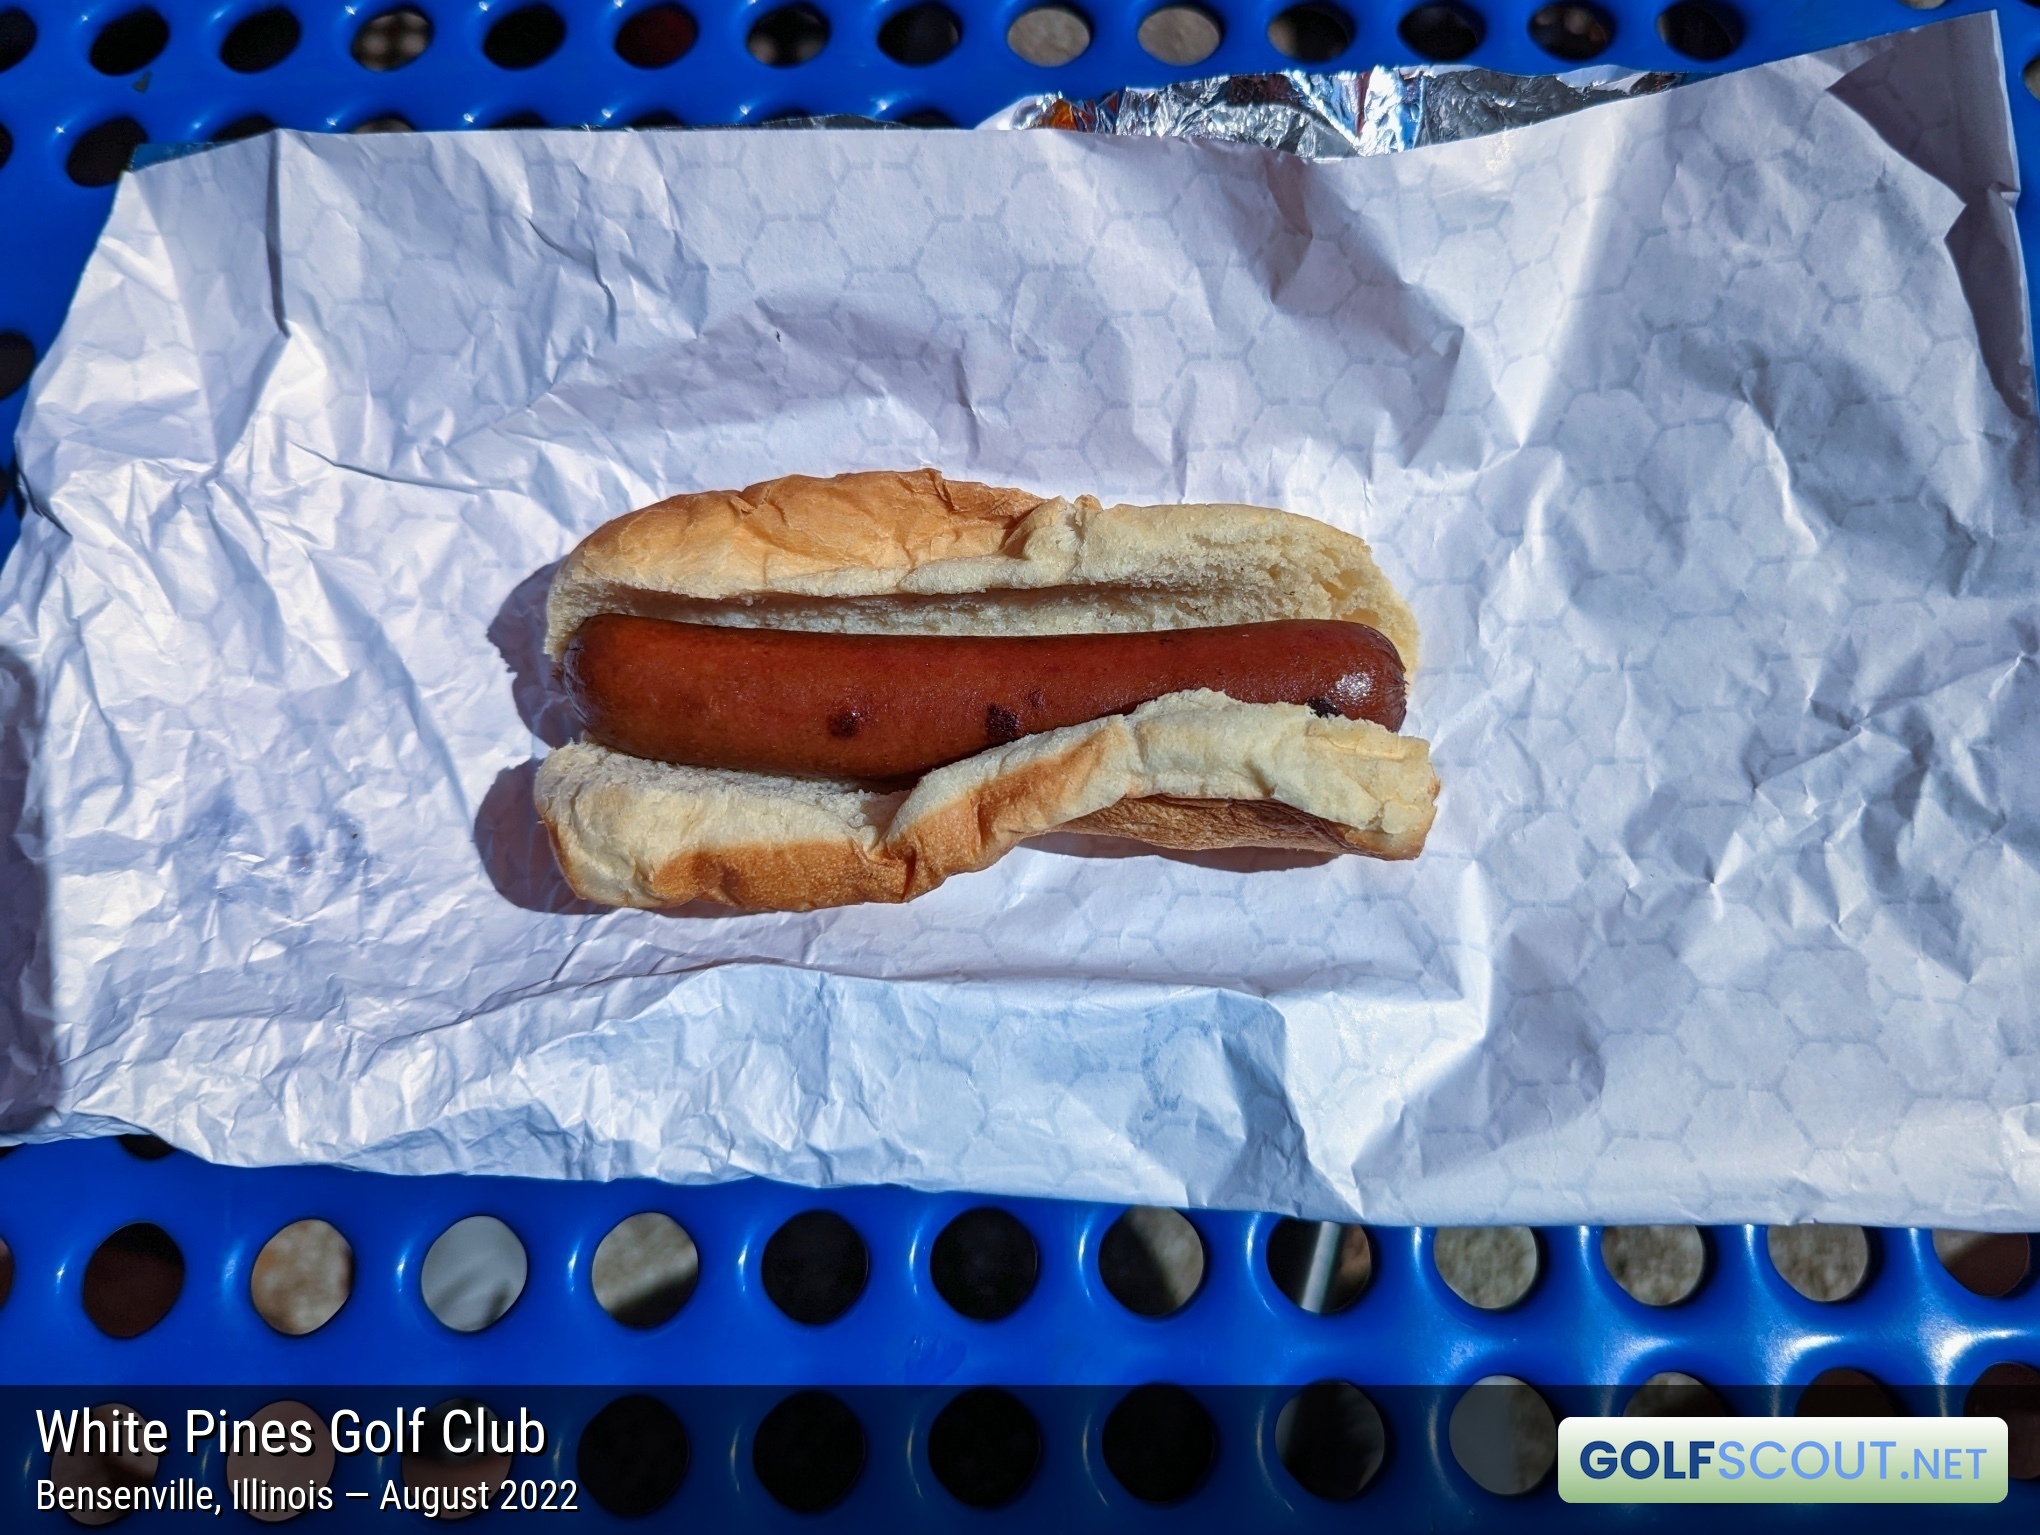 Photo of the food and dining at White Pines Golf Club in Bensenville, Illinois. Photo of the hot dog at White Pines Golf Club in Bensenville, Illinois.